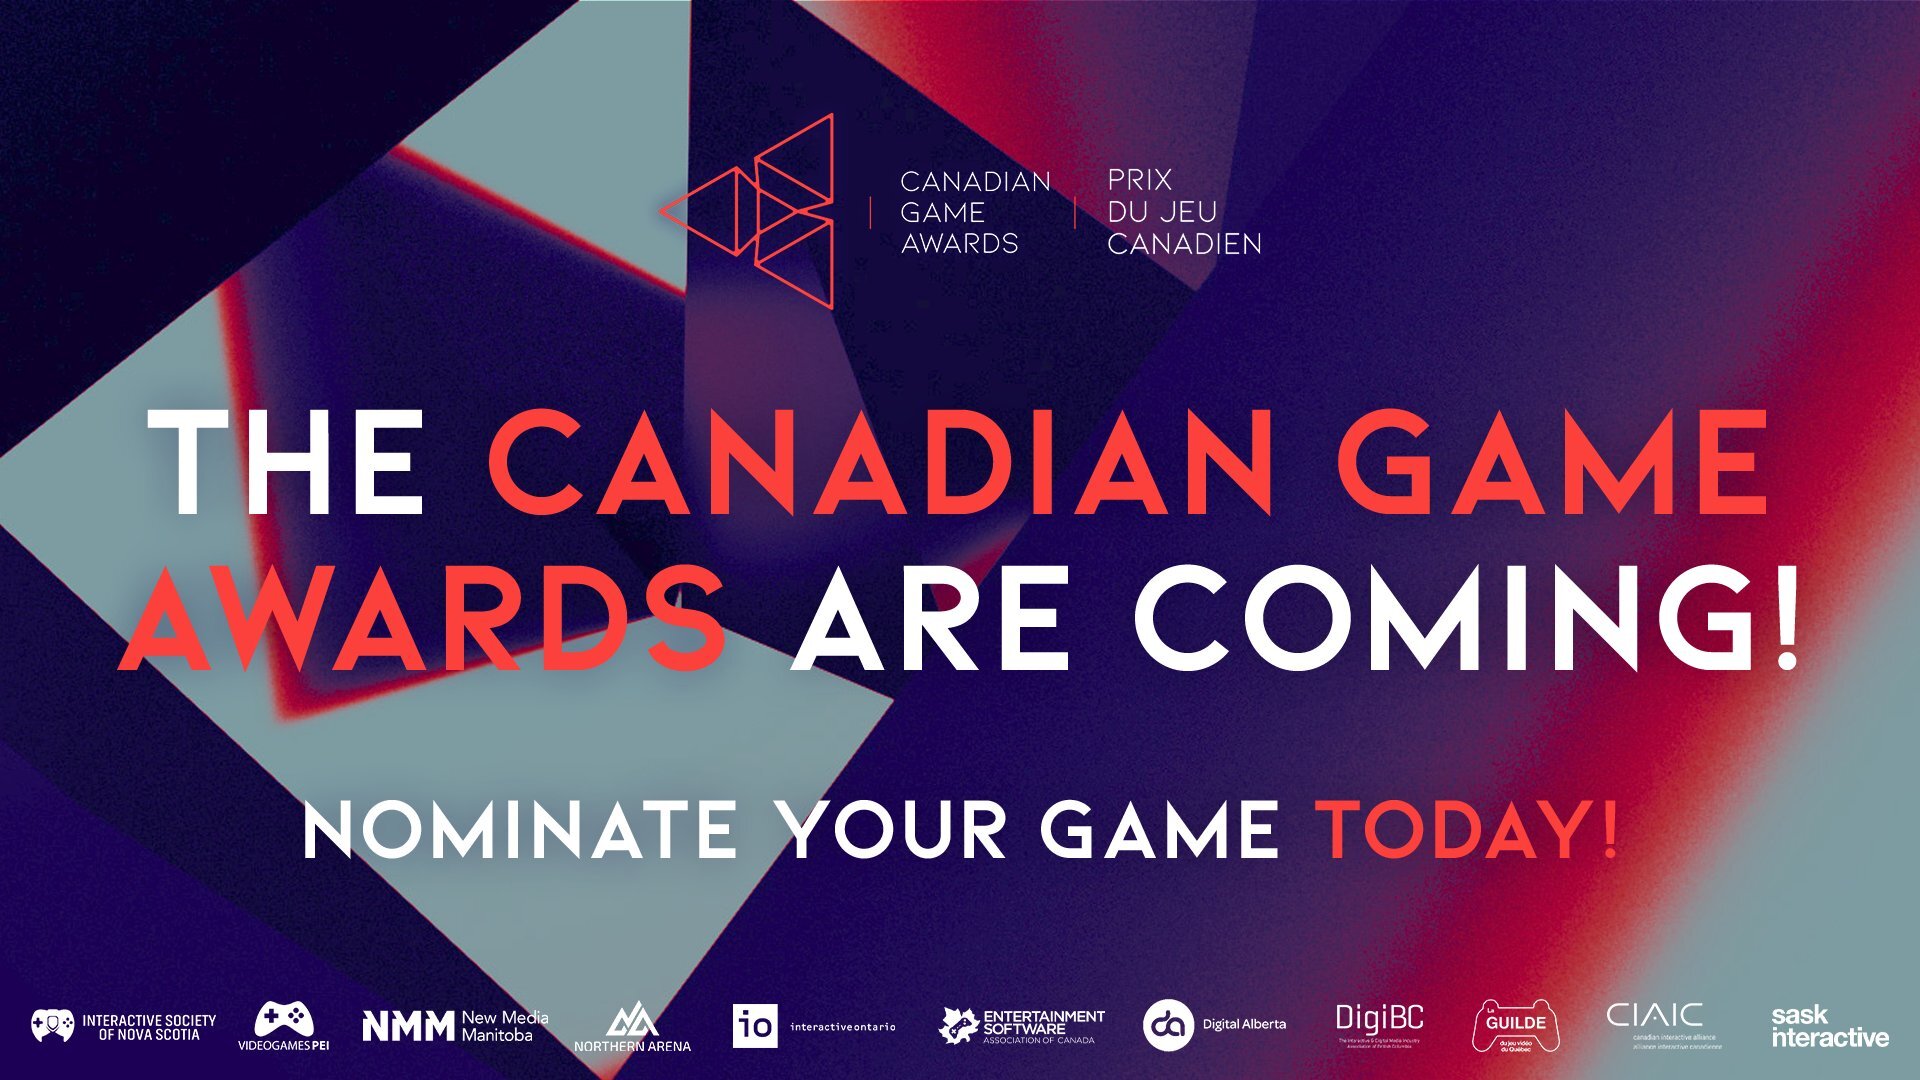 The Canadian Game Awards are Coming!